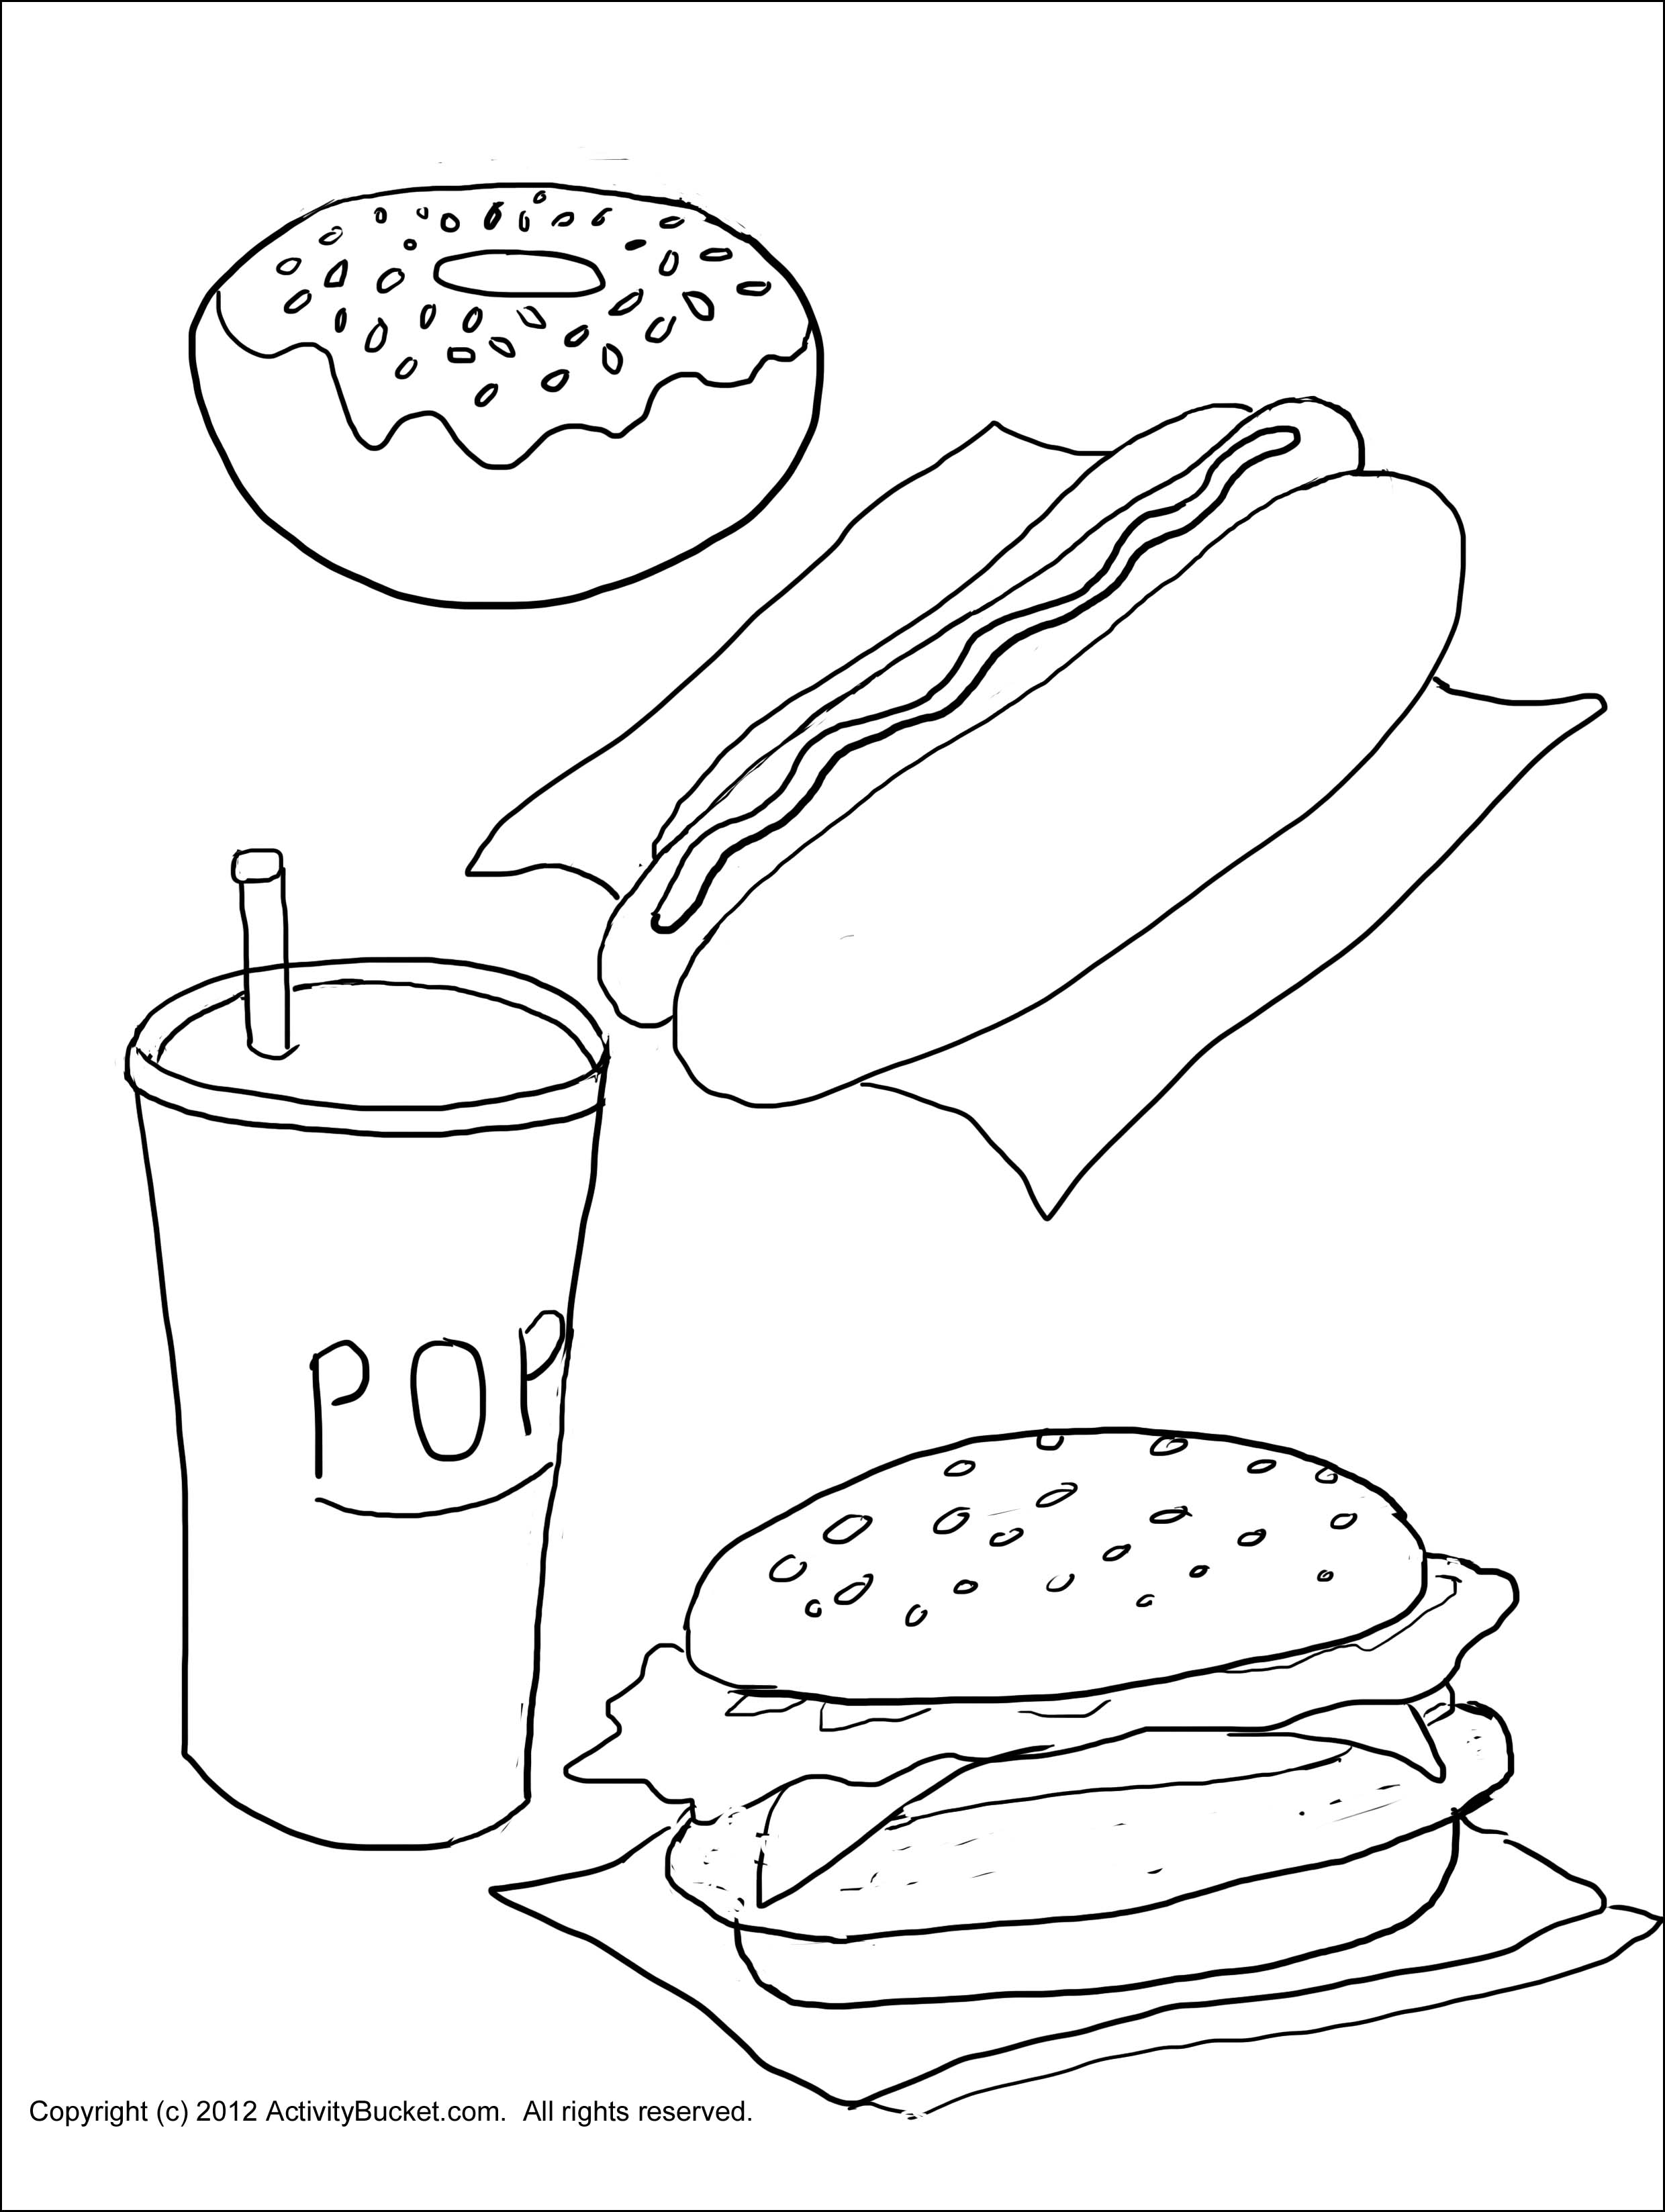 Unhealthy Food Coloring Pages at Free printable